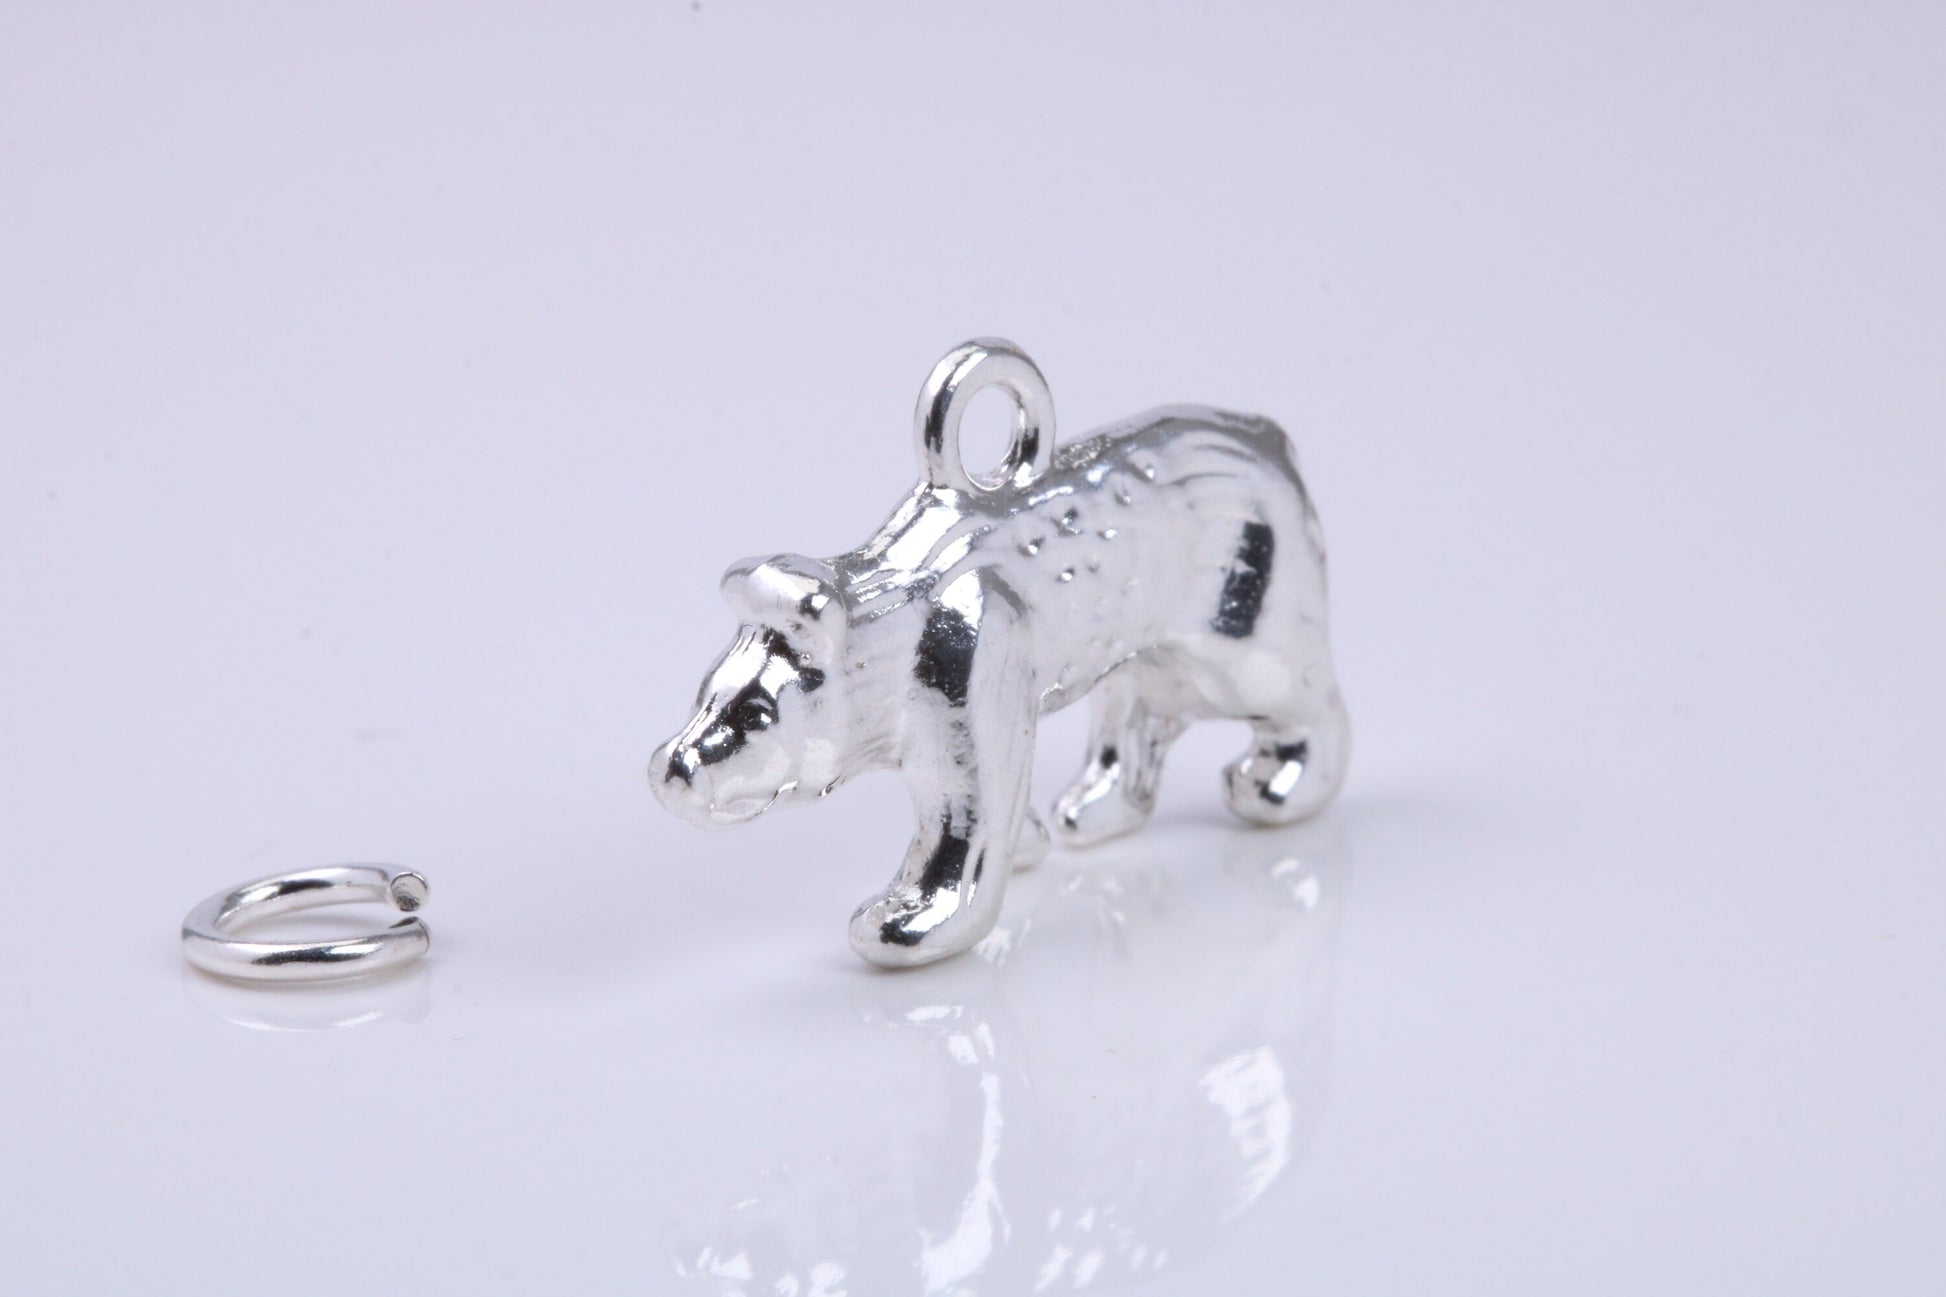 California Bear Charm, Traditional Charm, Made from Solid 925 Grade Sterling Silver, Complete with Attachment Link